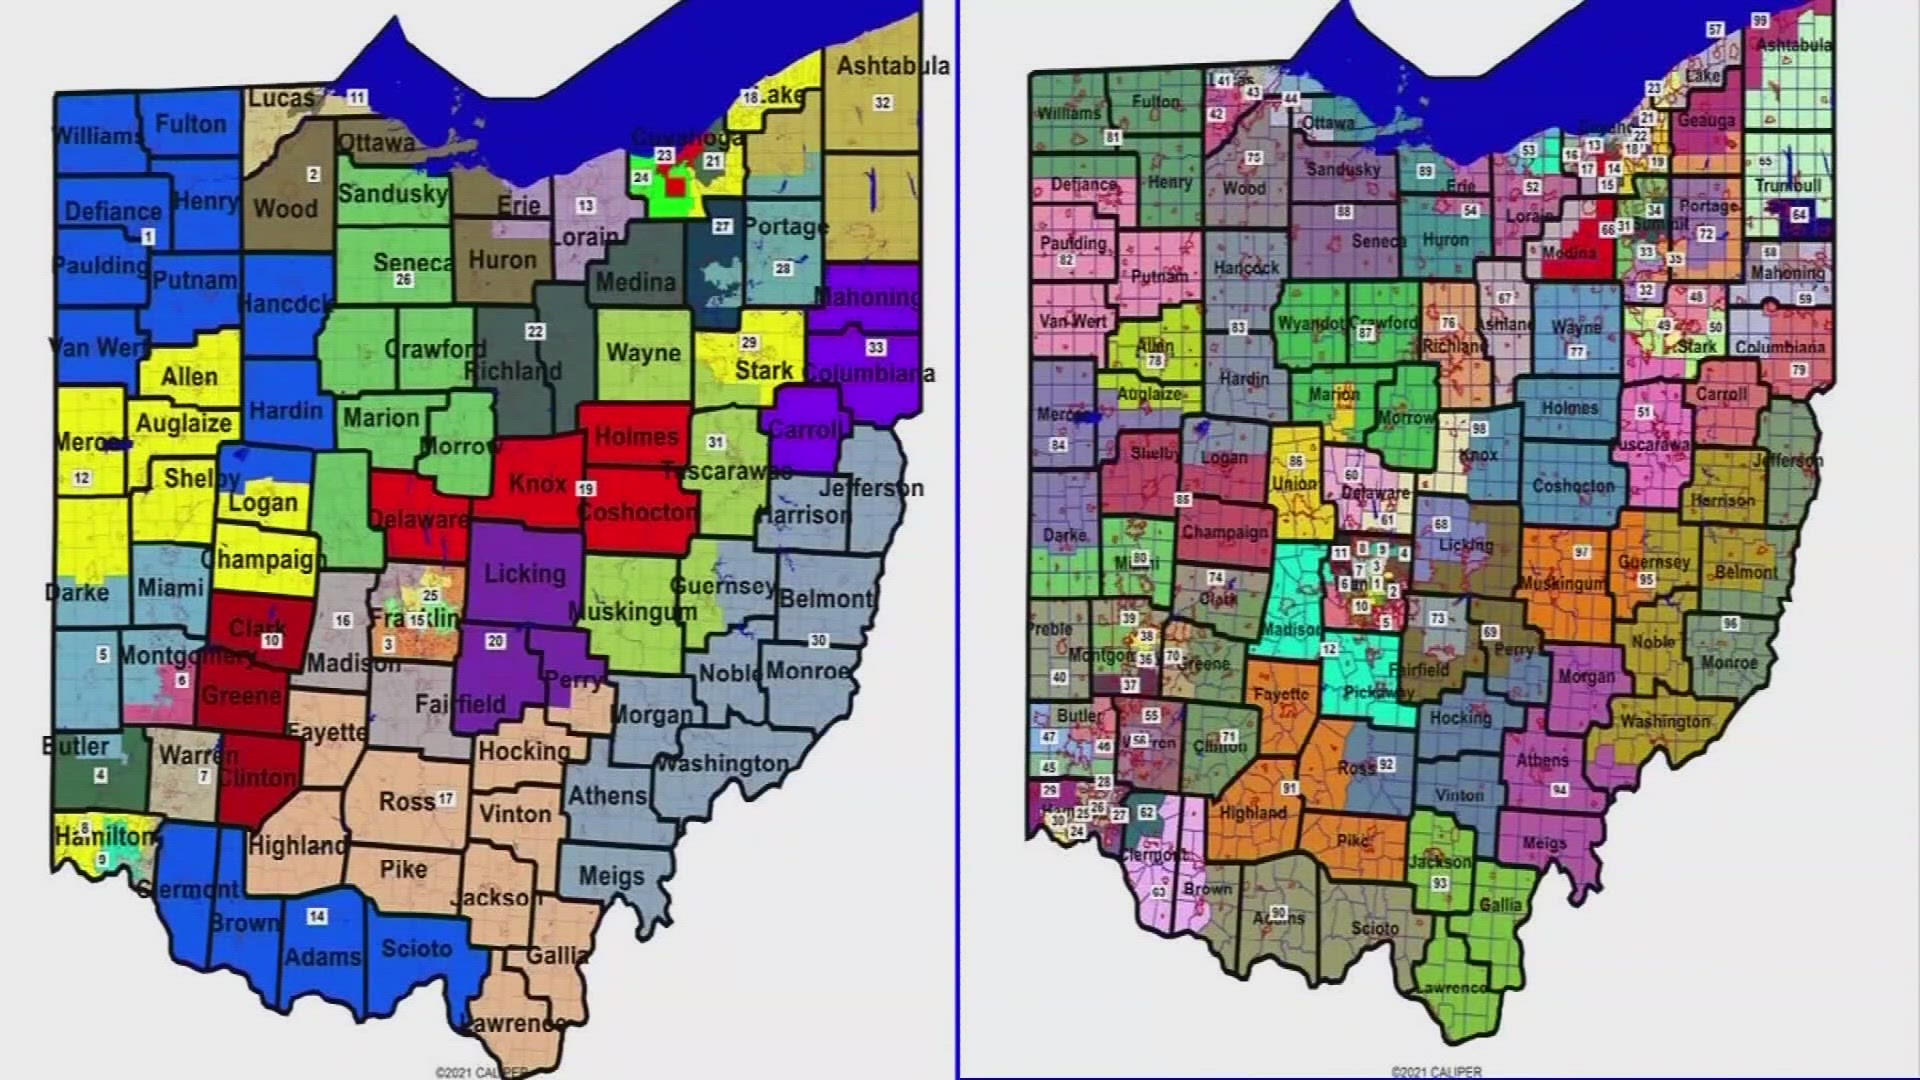 The commission will meet to redraw new redistricting maps.